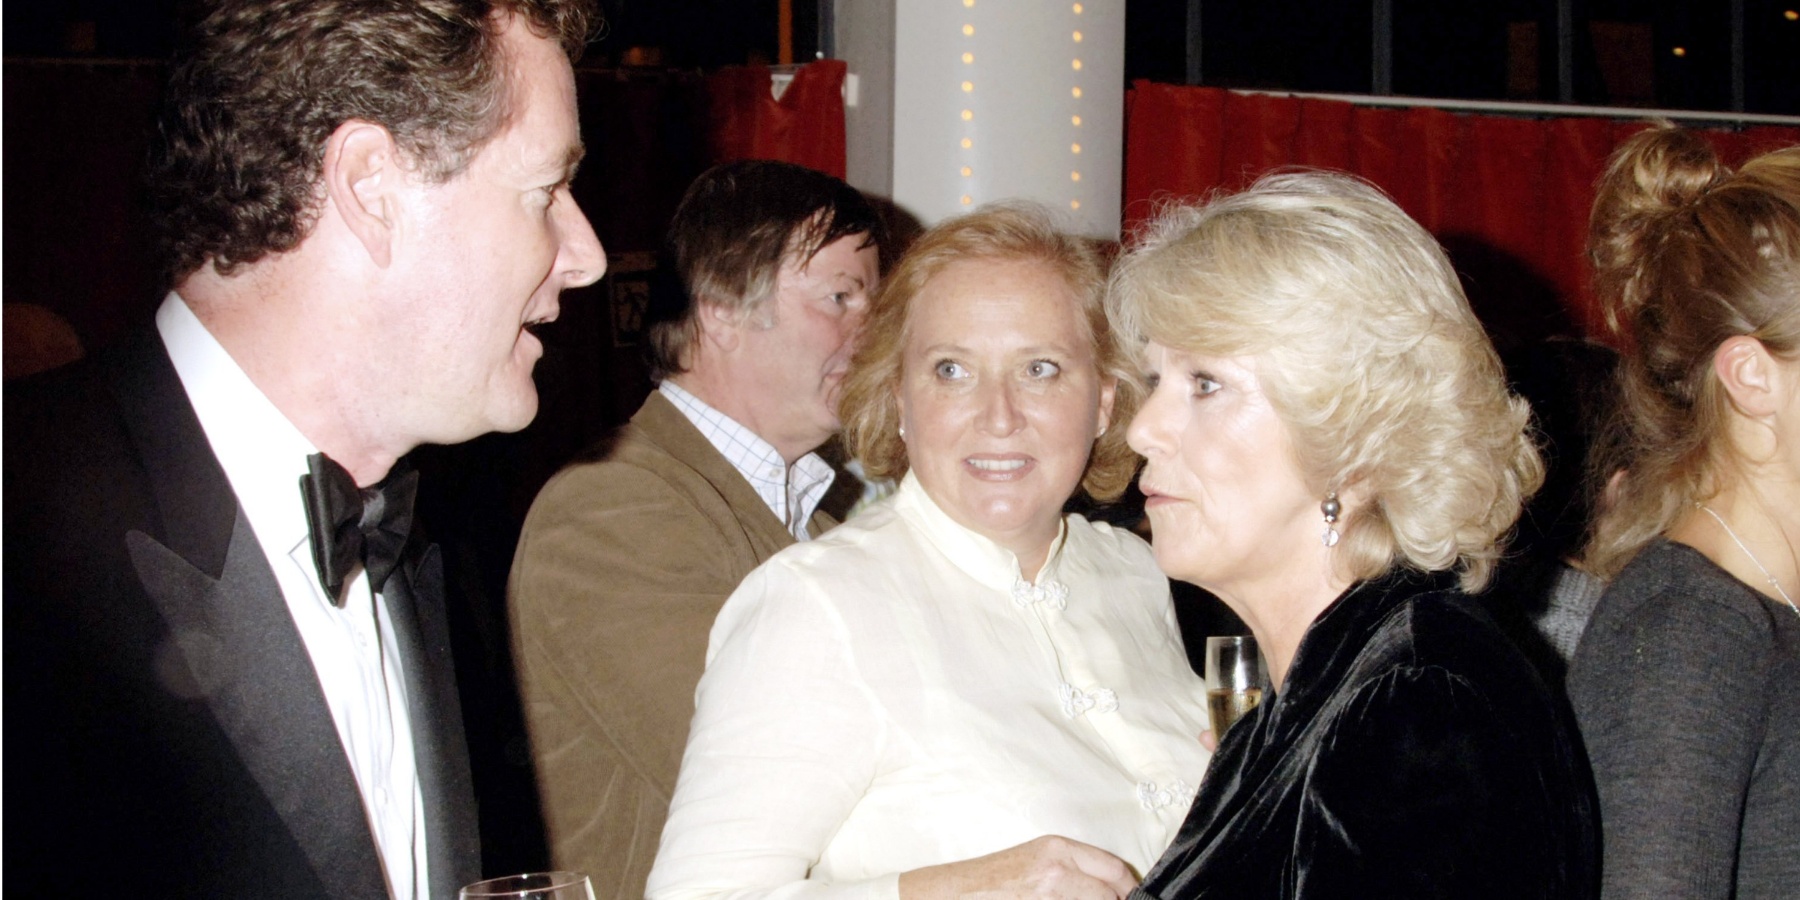 Piers Morgan and Camilla Parker Bowles photographed together at Kensington Place on October 12, 2006.